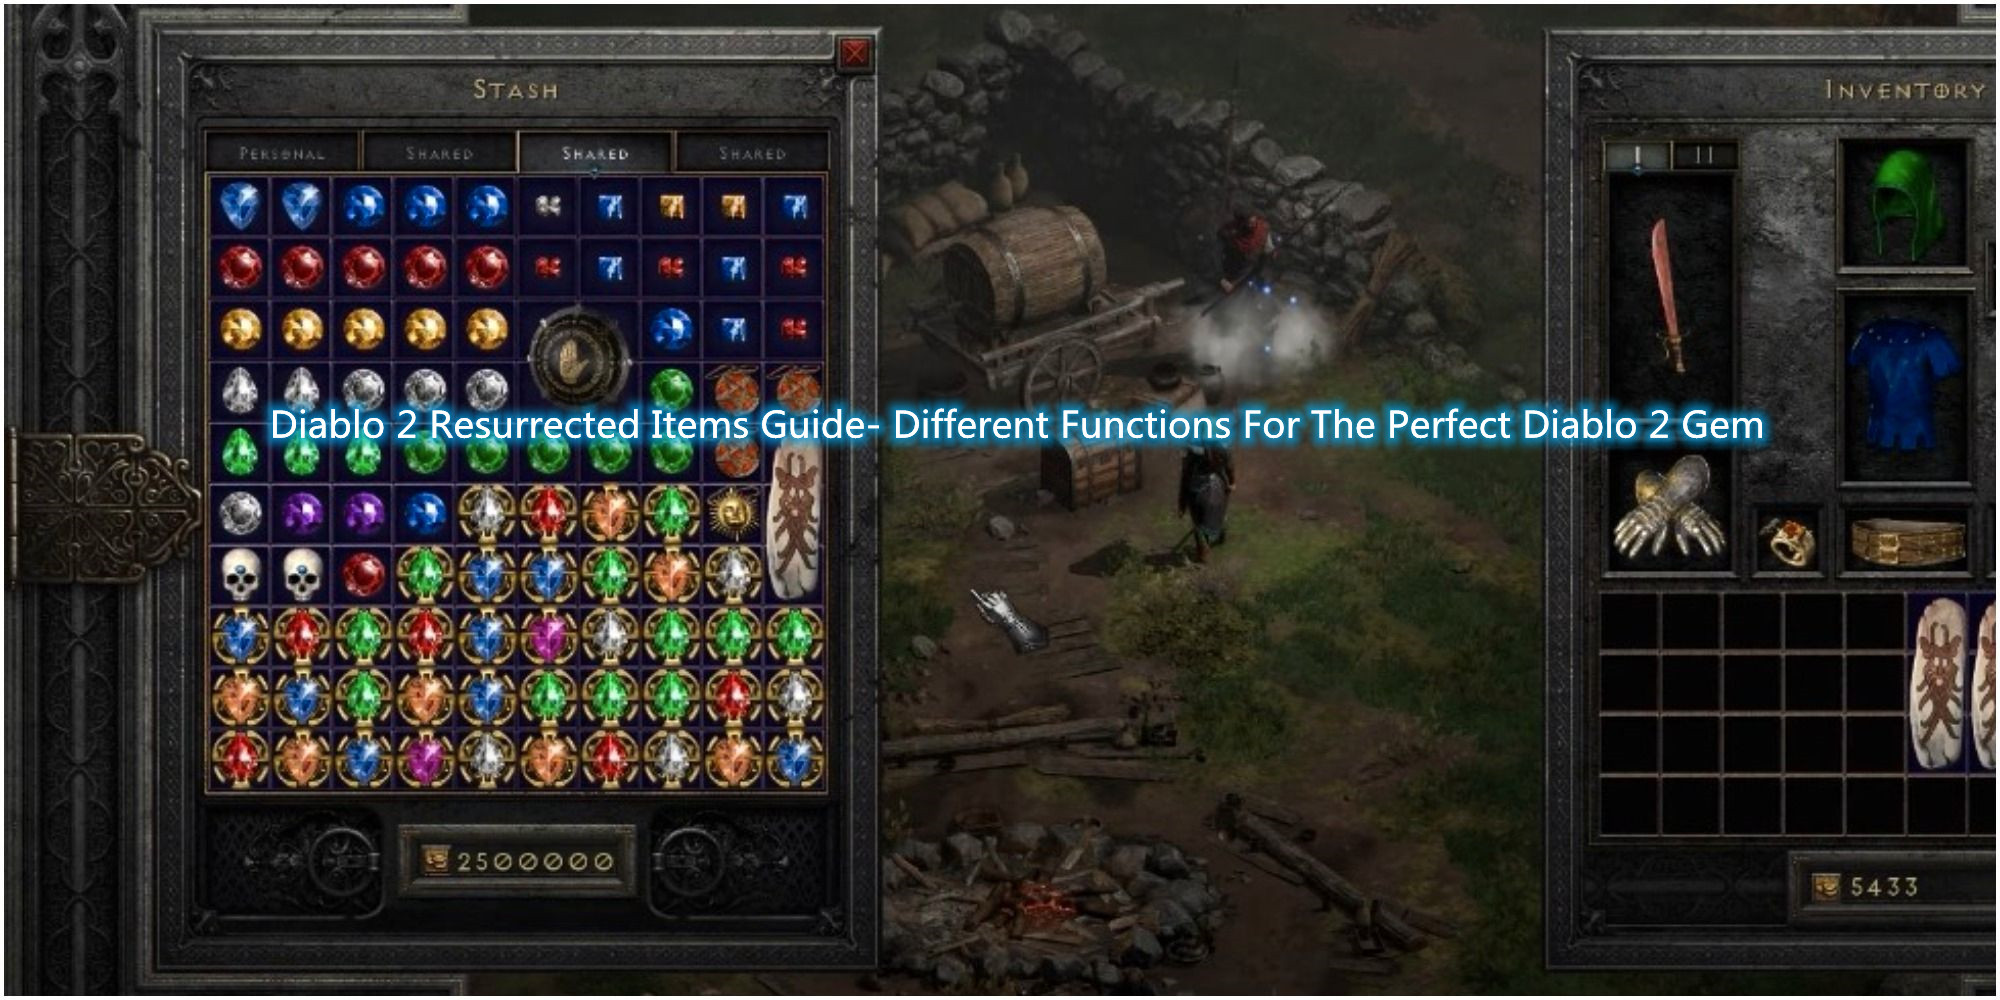 Diablo 2 Resurrected Items Guide- Different Functions For The Perfect Diablo 2 Gem